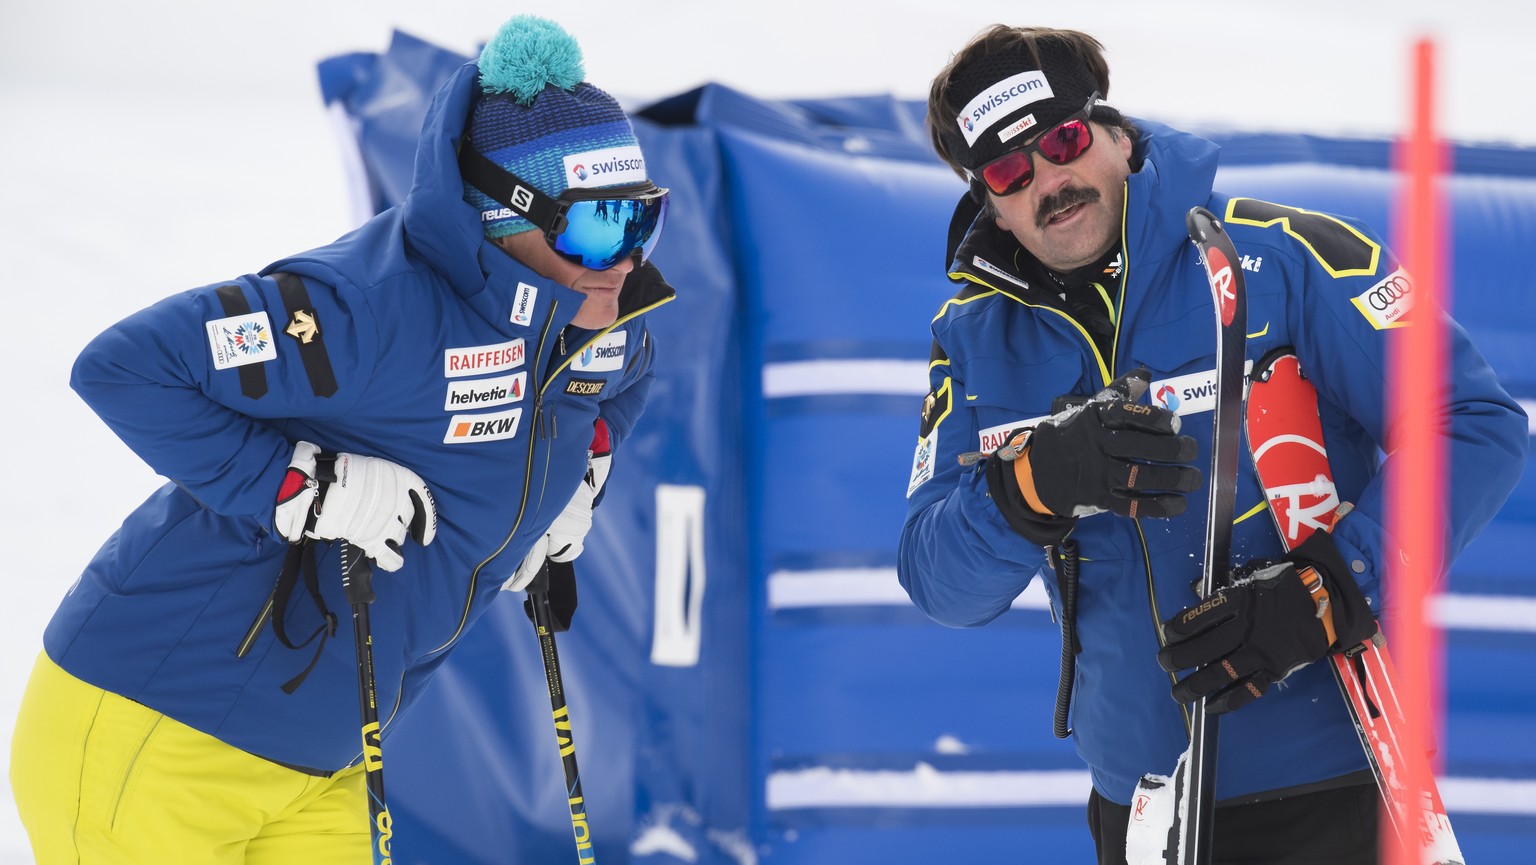 Urs Lehmann, left, president of the Swiss-Ski Federation talks with Thomas Stauffer, right, head coach of the Swiss men&#039;s alpine ski team before the second run of the menÕs slalom race of the FIS ...